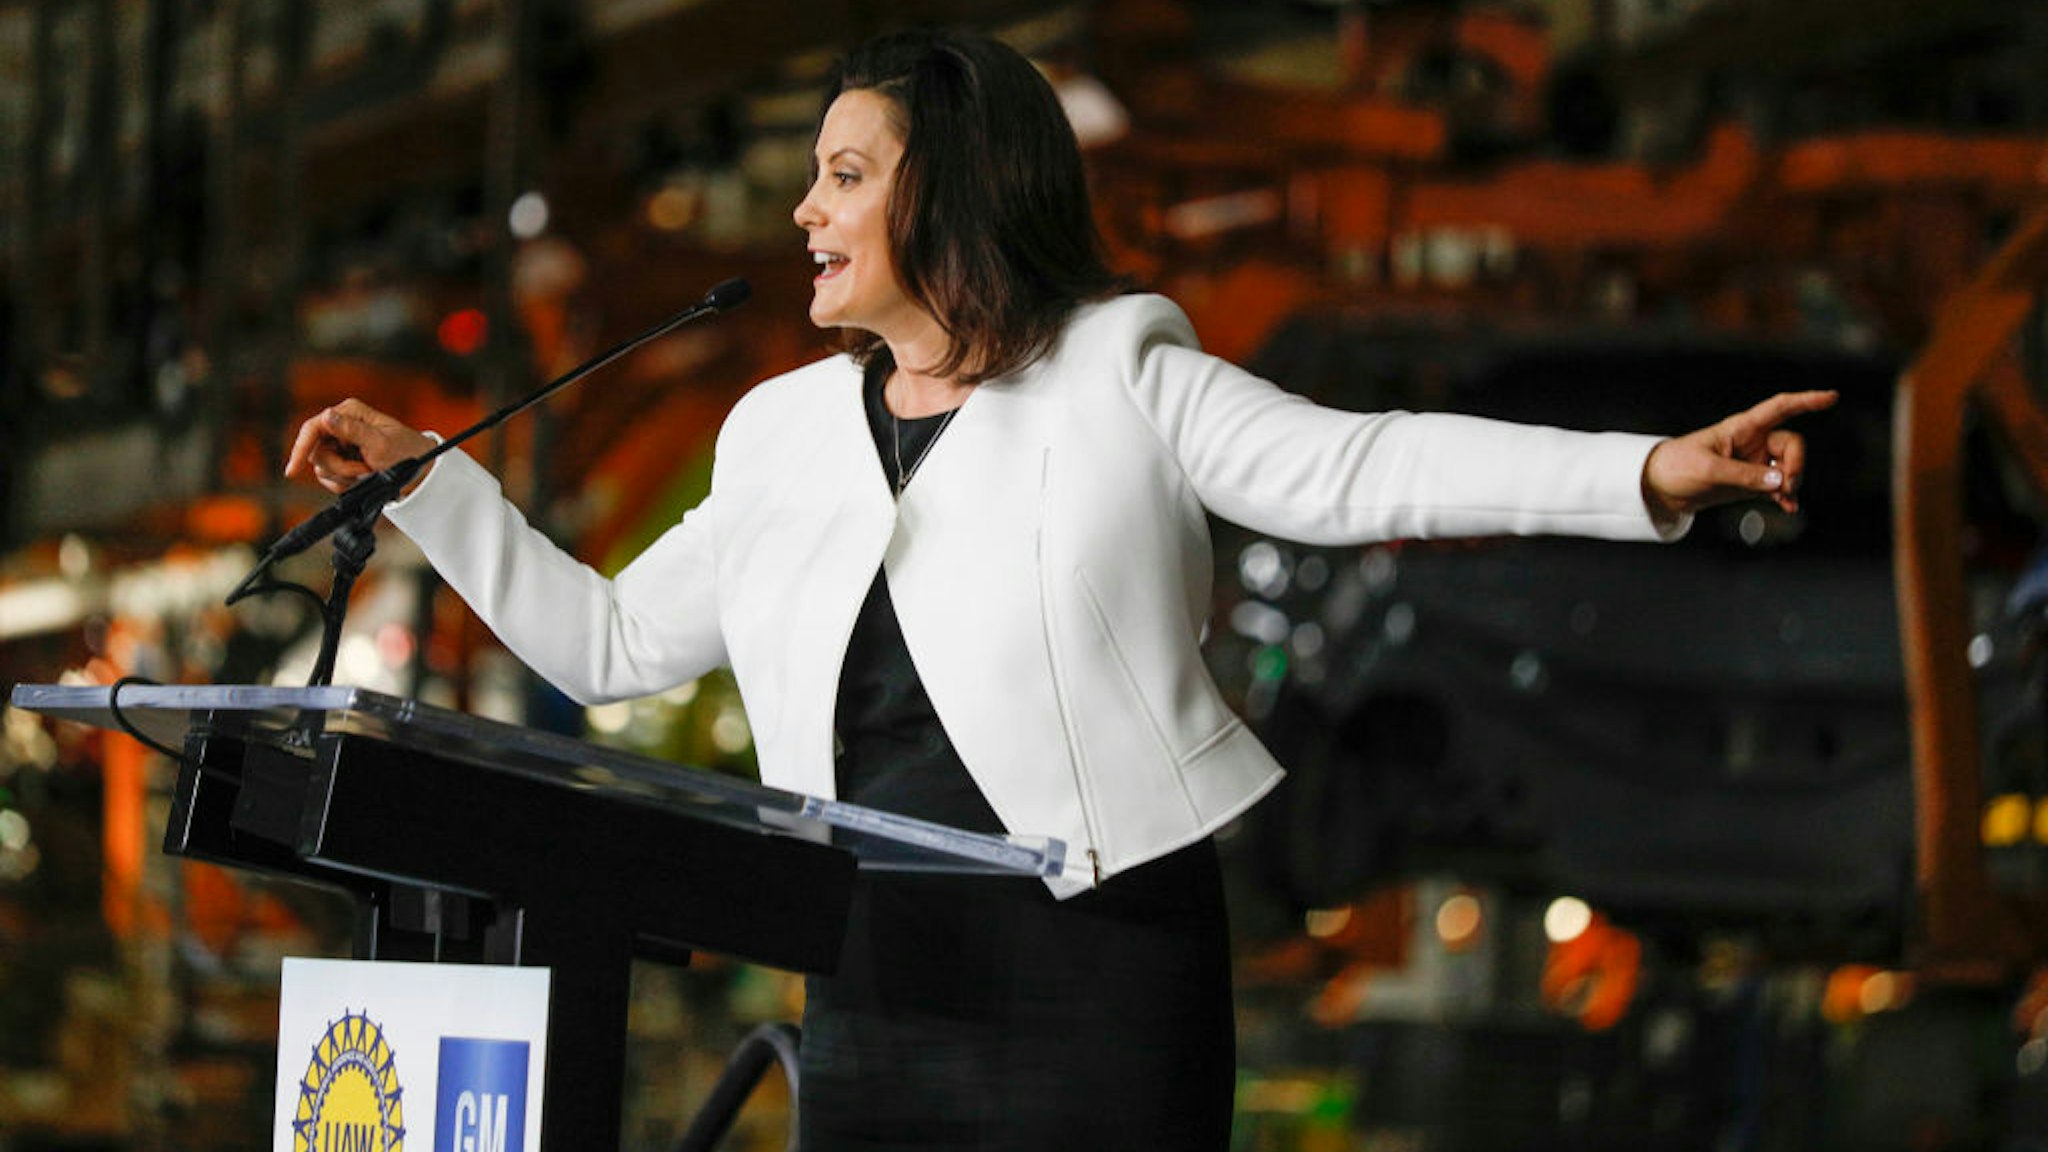 LAKE ORION, MI - MARCH 22: Michigan Gov. Gretchen Whitmer speaks at an event where General Motors Chairman and CEO Mary Barra announced a $300 million investment in the GM Orion Assembly Plant plant for electric and self-driving vehicles at the Orion Assembly Plant on March 22, 2019 in Lake Orion, Michigan. (Photo by Bill Pugliano/Getty Images)